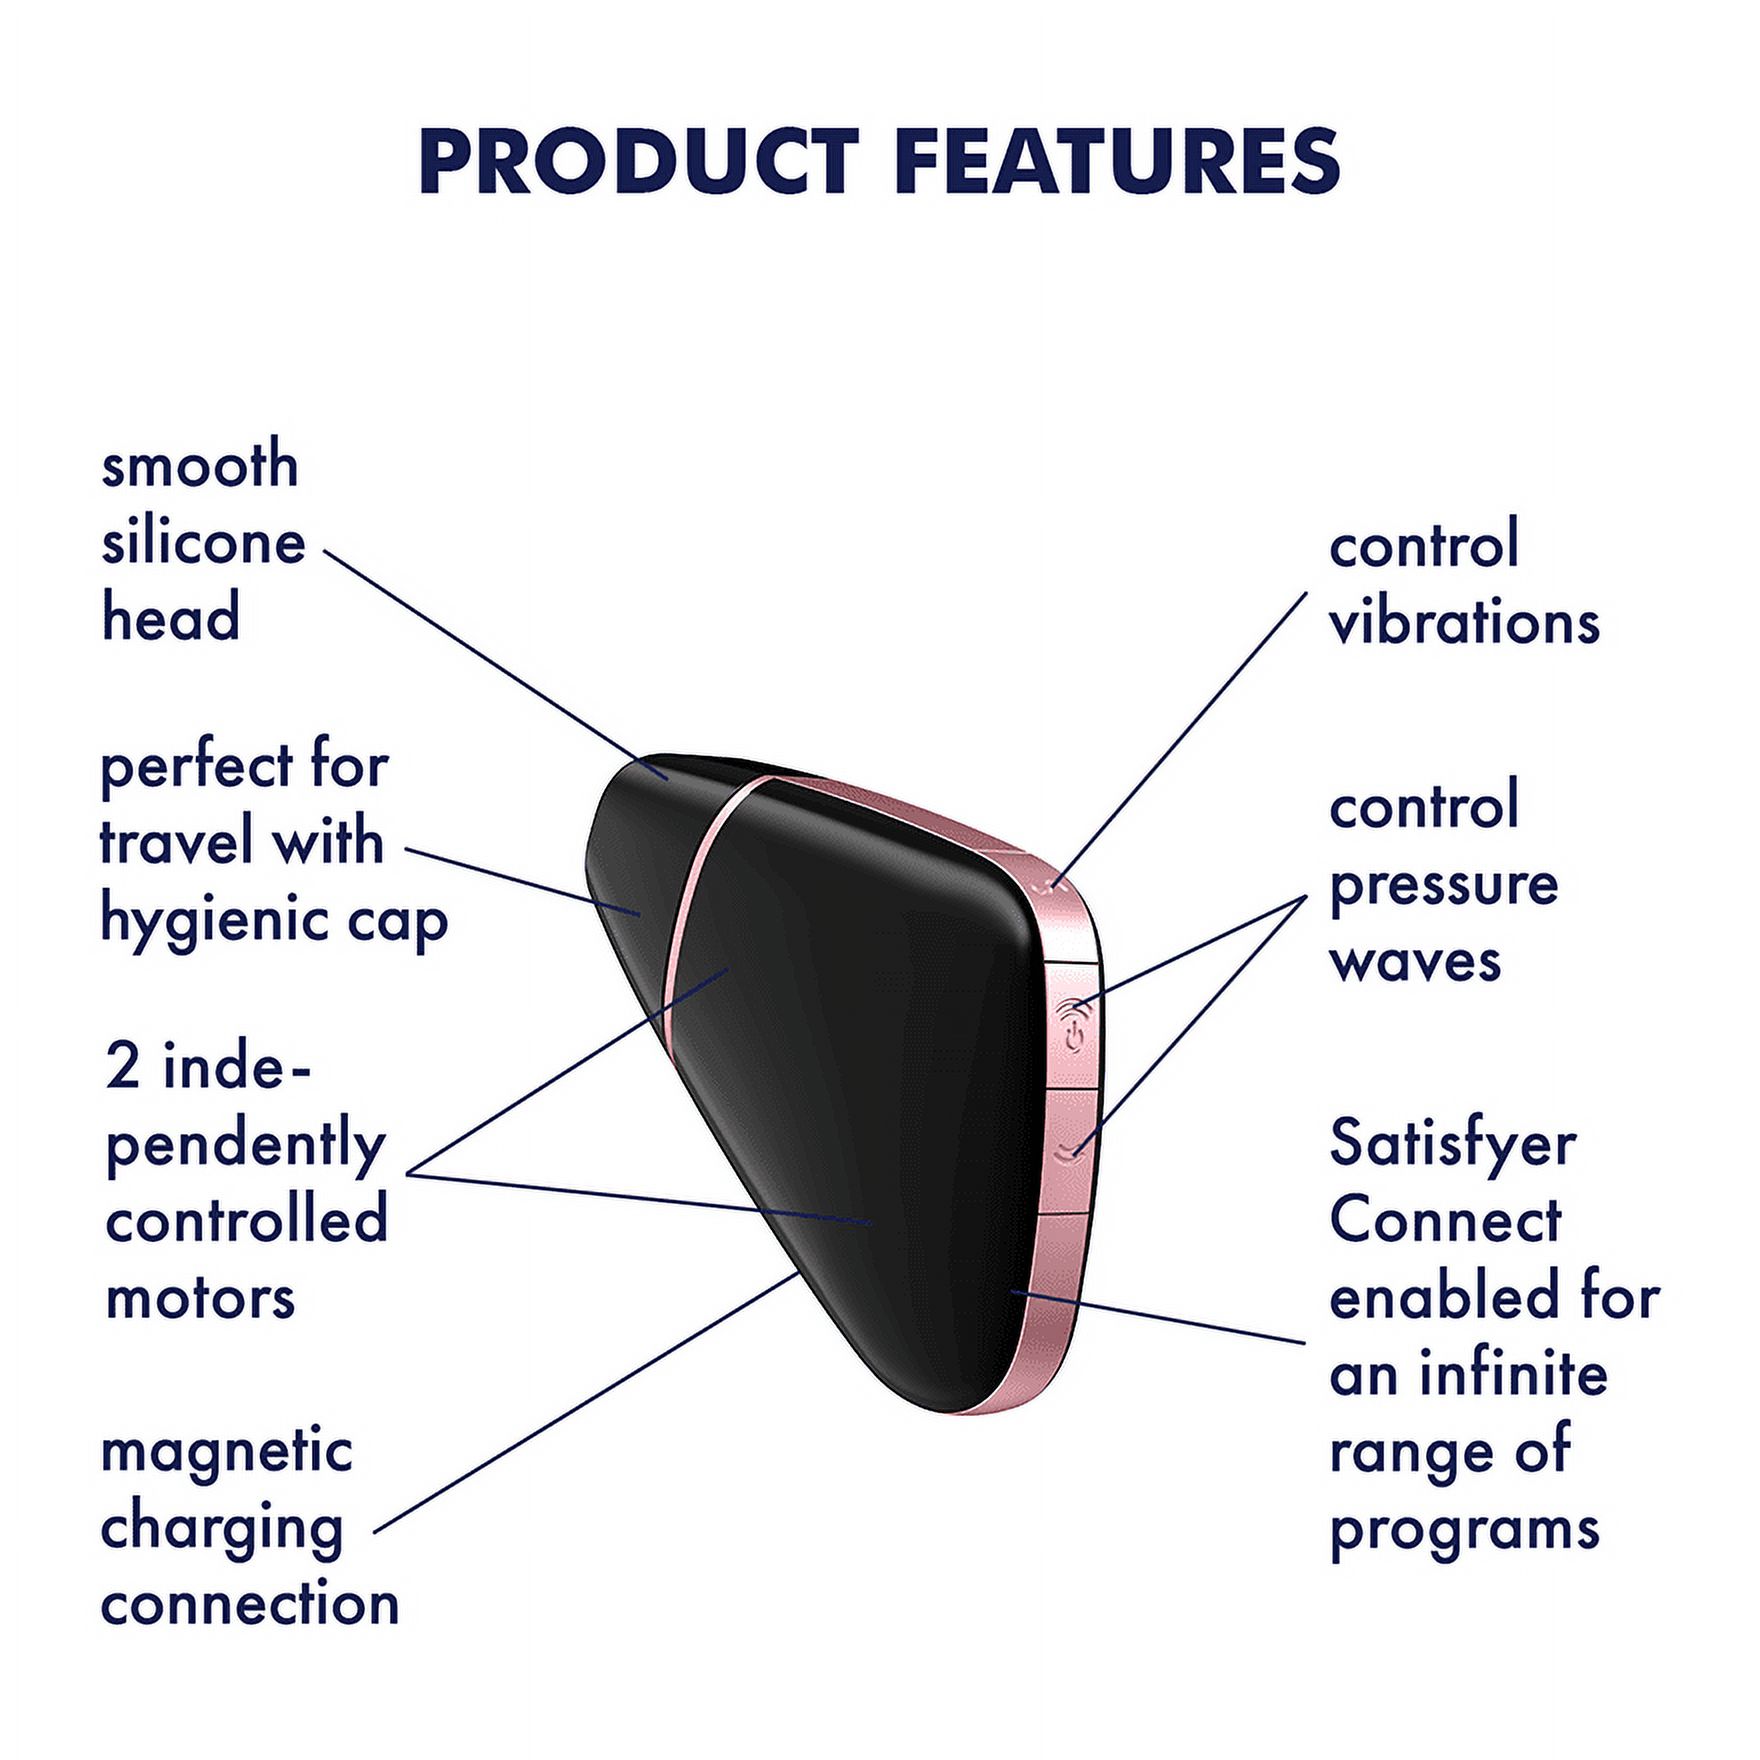 Satisfyer Love Triangle Air-Pulse Clitoris Stimulating Vibrator with App Control - Clitoral Sucking Pressure-Waves + Vibration, Compatible with Satisfyer App, Waterproof, Rechargeable (Black) - image 3 of 10